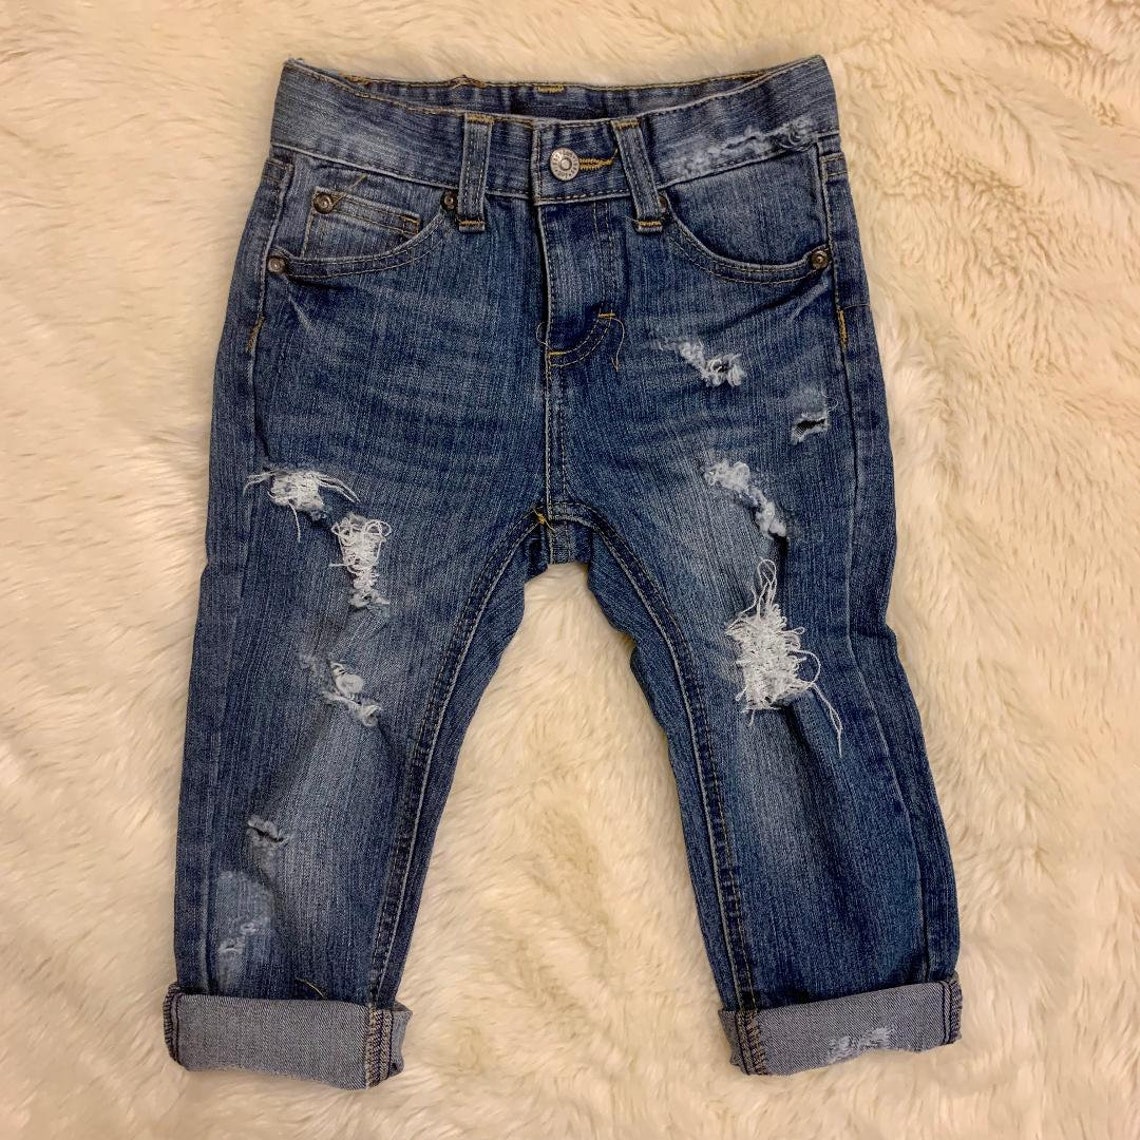 Toddler Boy Distressed Jeans 3T - Etsy